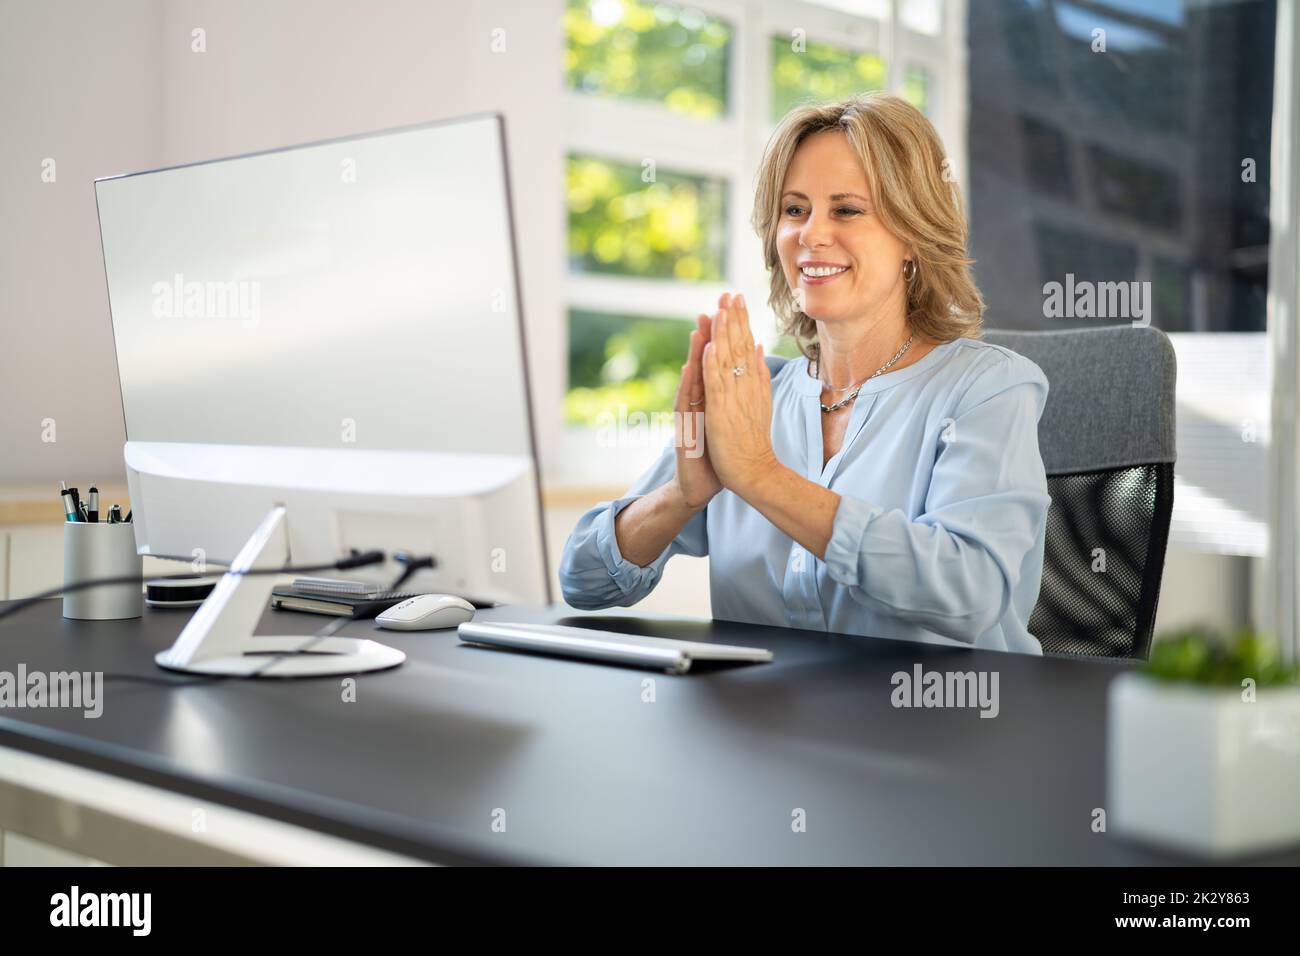 Online Virtual Training Webinar Conference On Computer Stock Photo